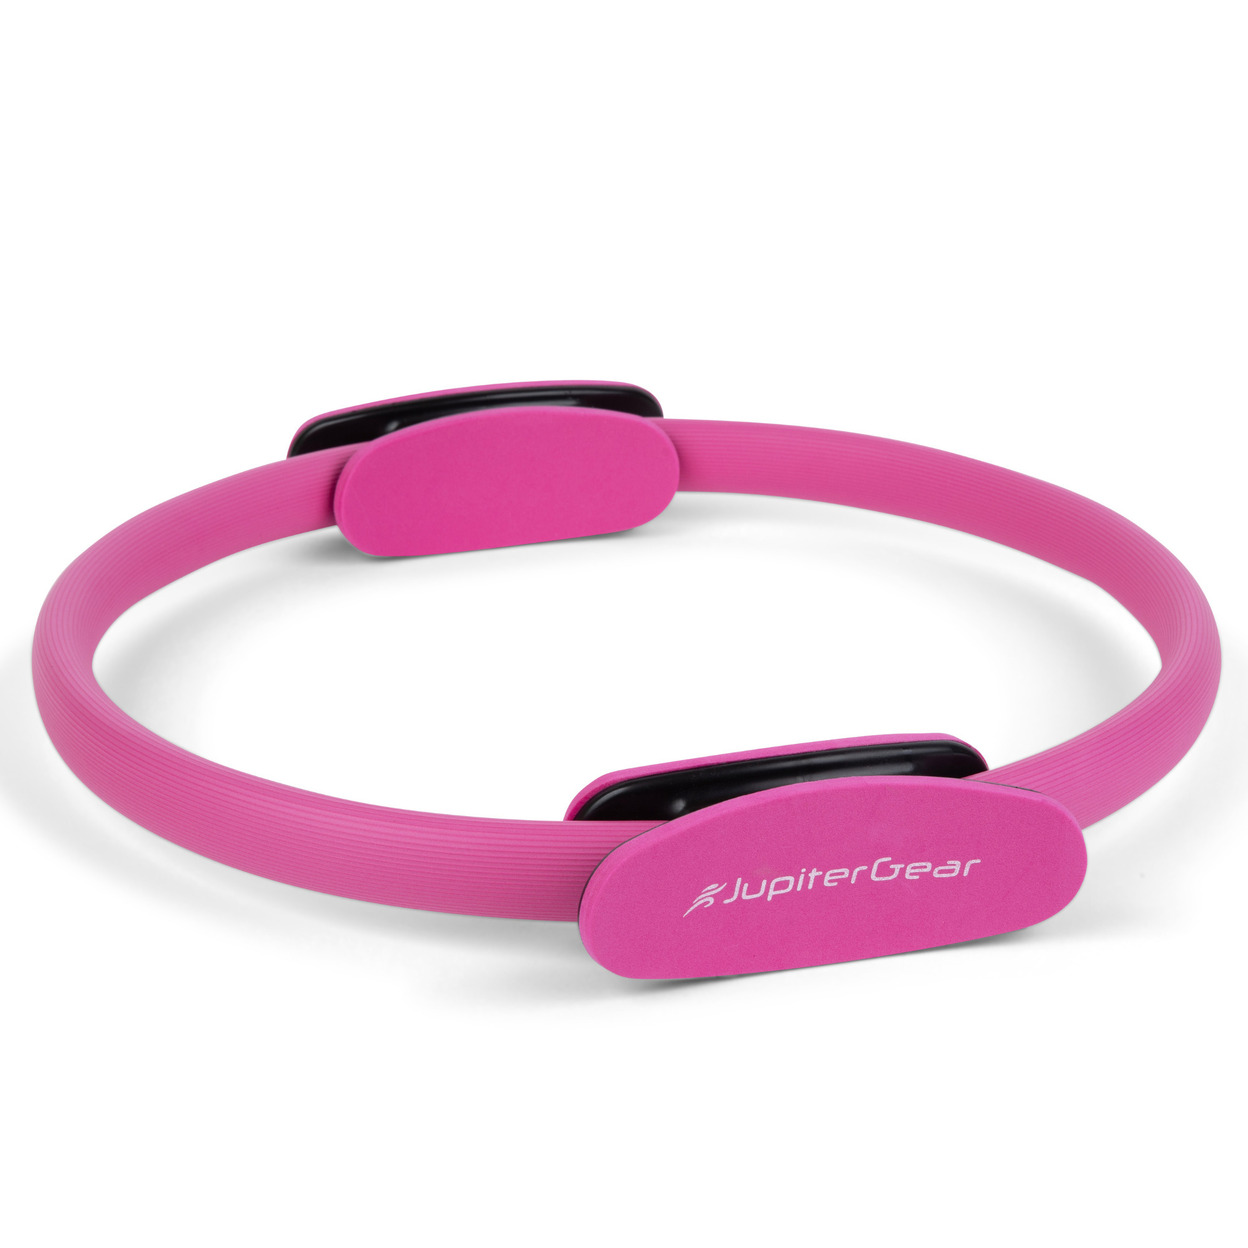 Pilates Resistance Ring For Strengthening Core Muscles - Pink